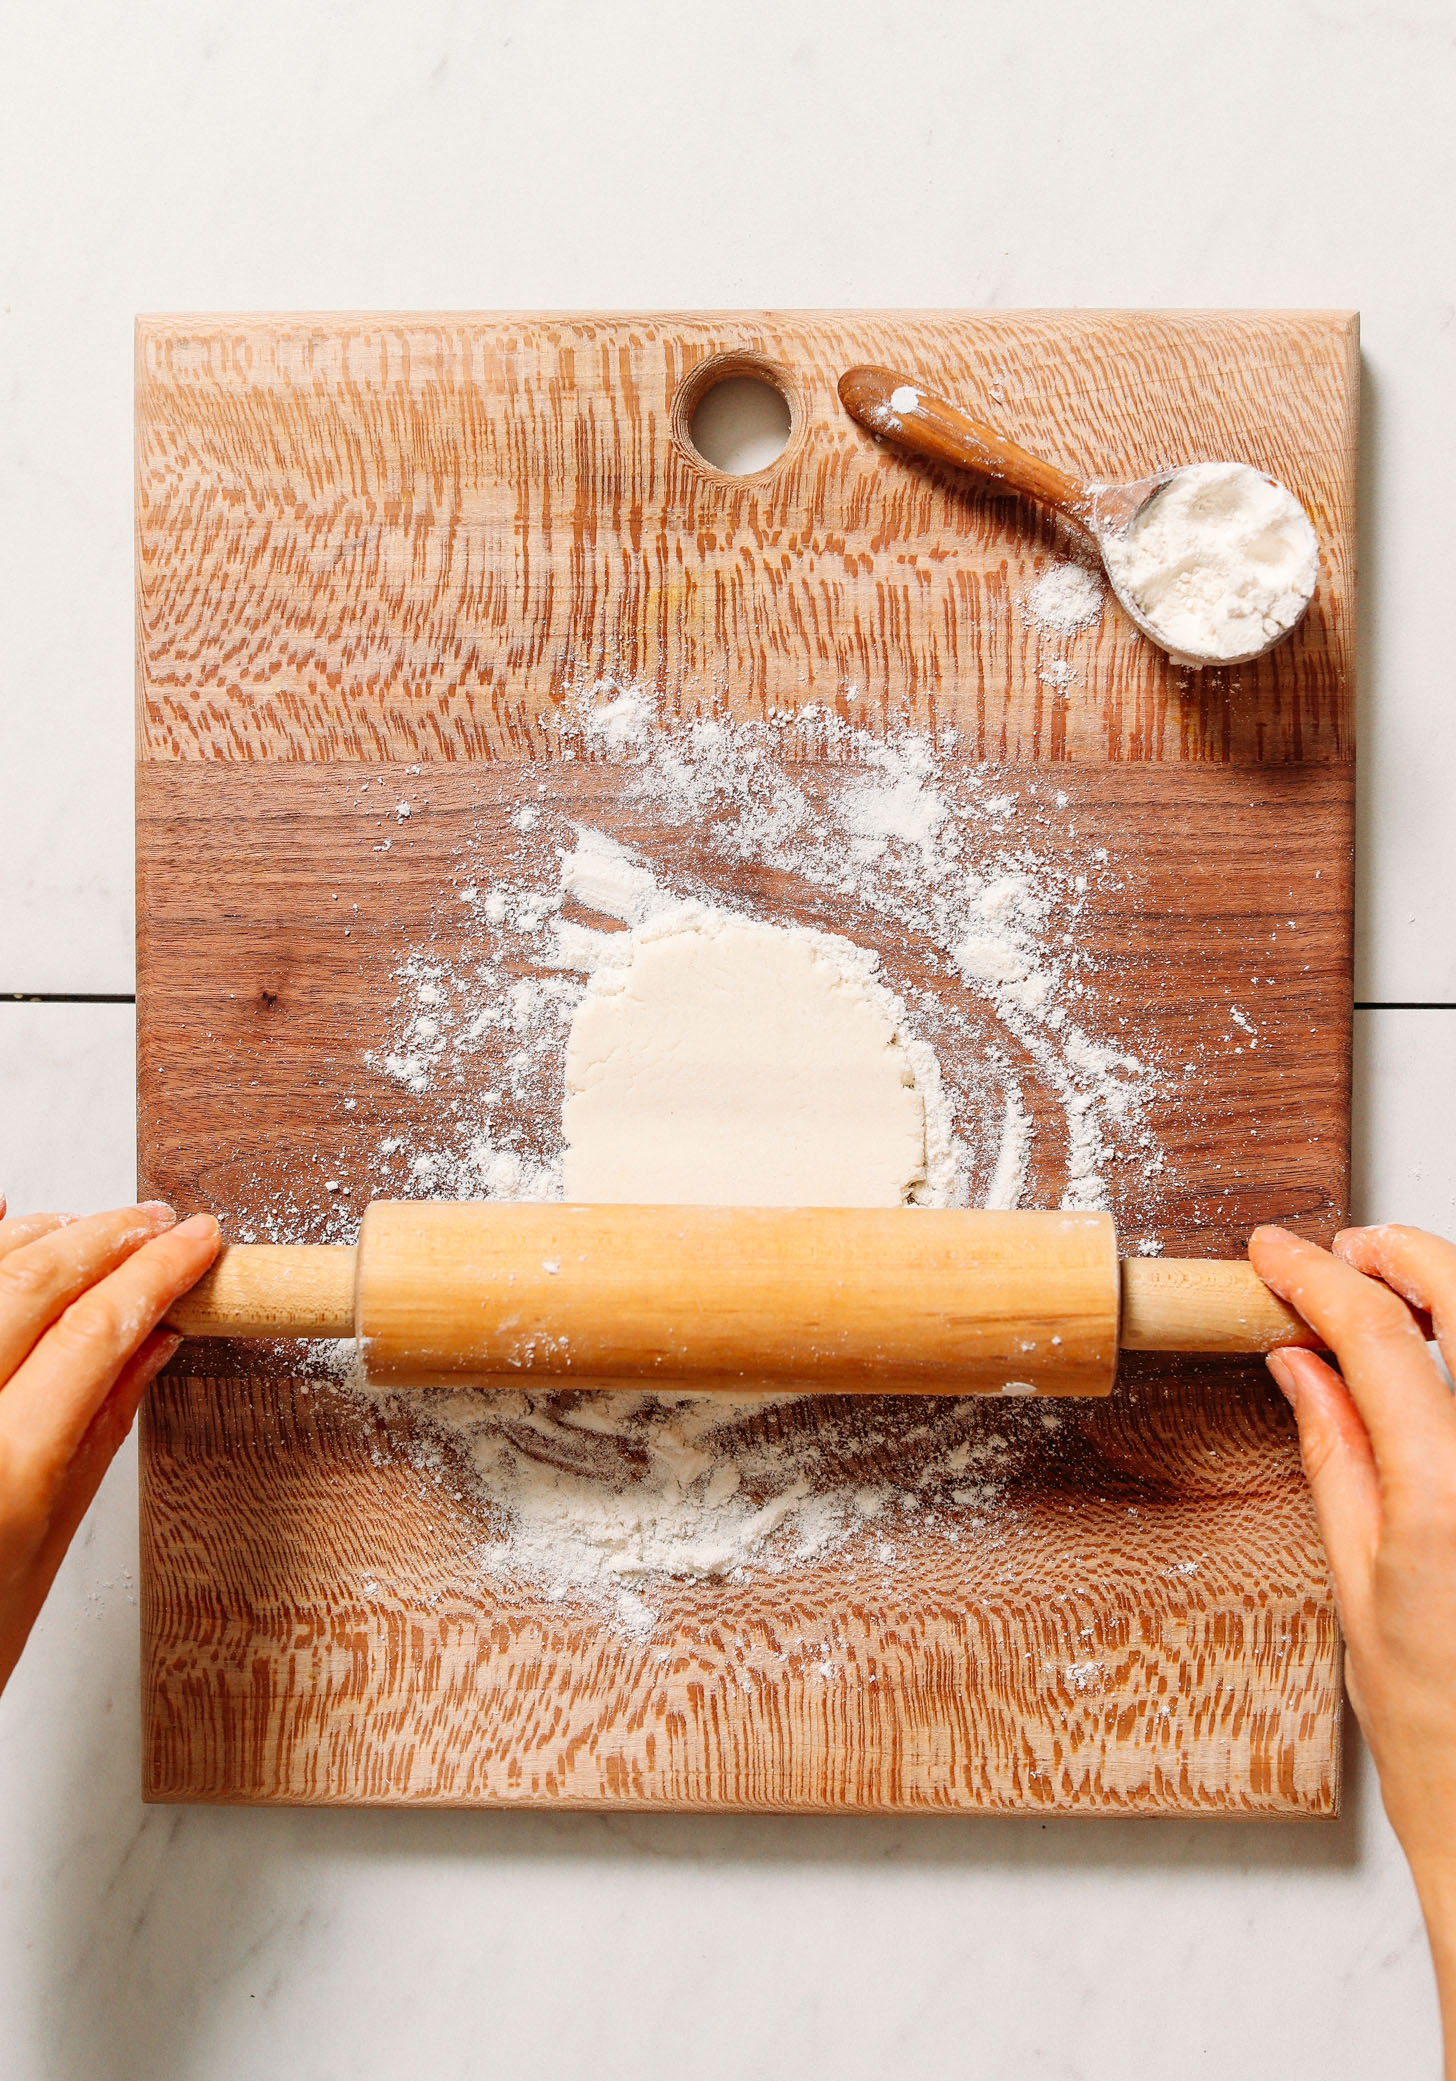 Using a rolling pin to roll out naan dough on a floured surface